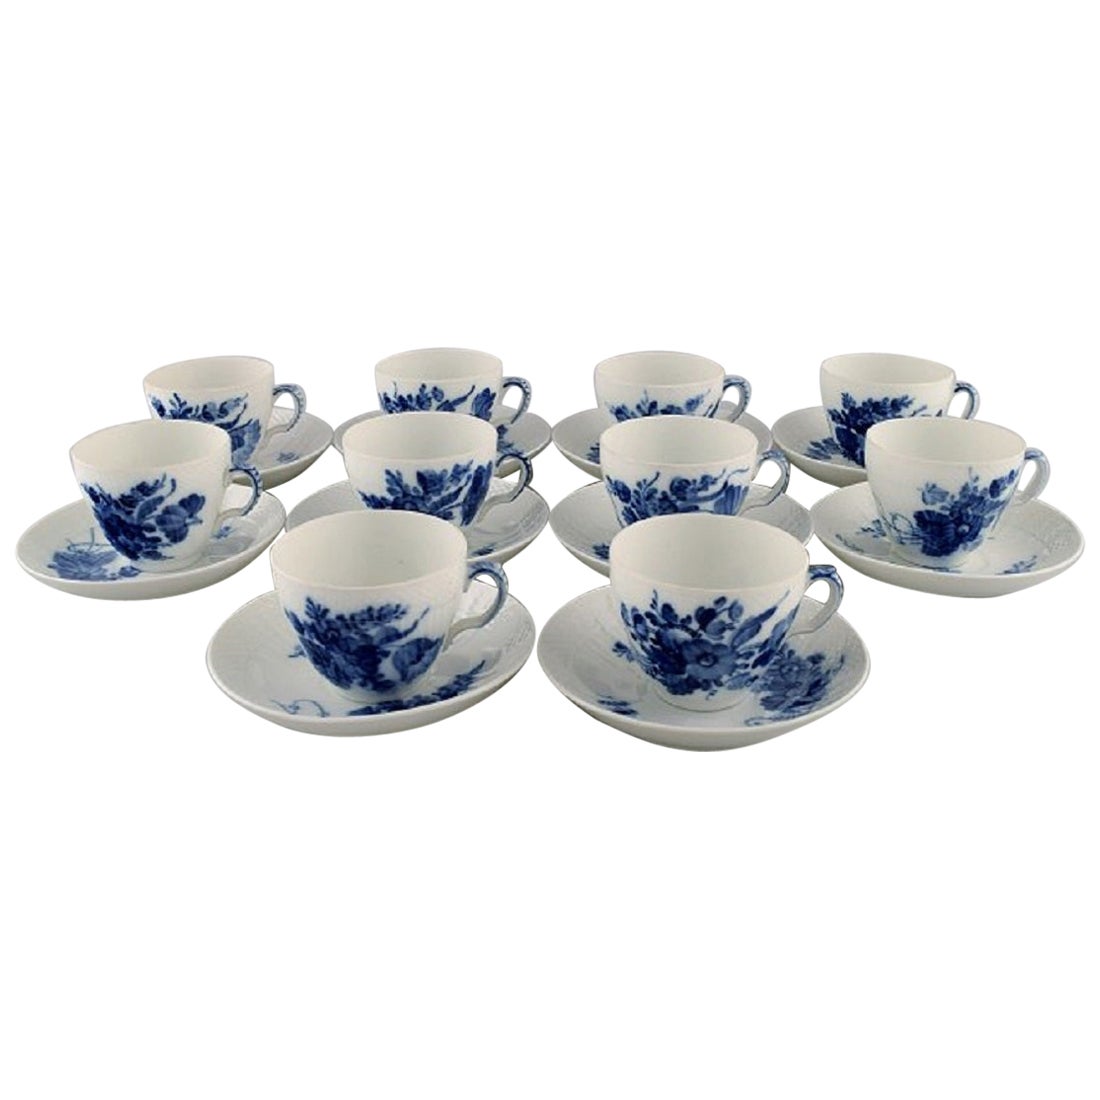 10 Royal Copenhagen Blue Flower Curved Coffee Cups with Saucers, 1960s